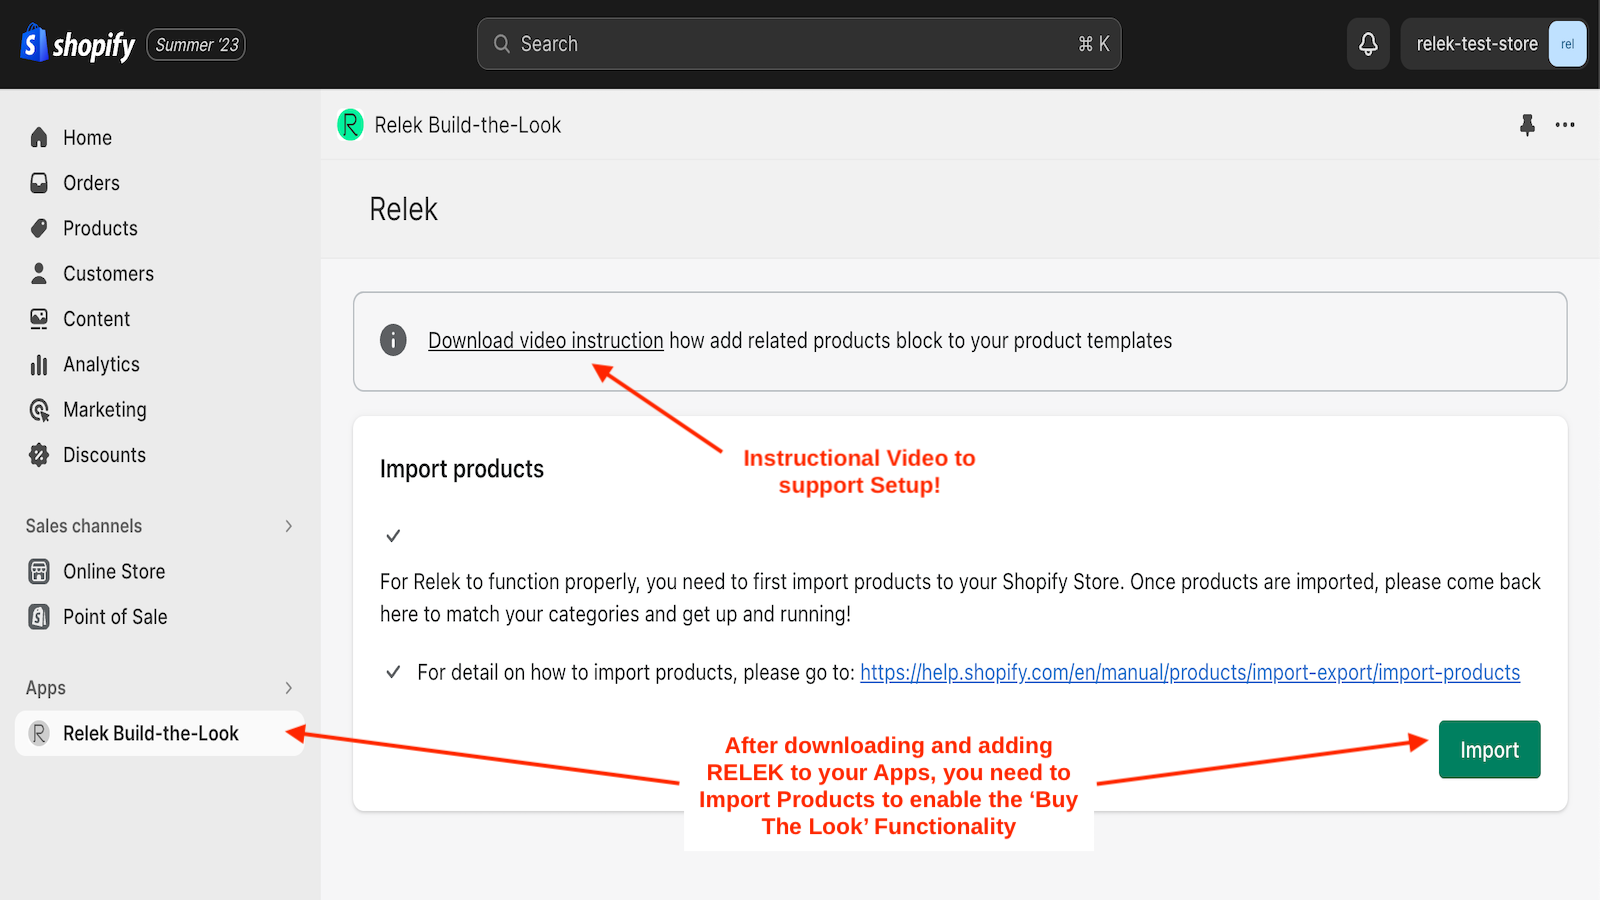 Step 1 - Importing Products to Relek via User Interface